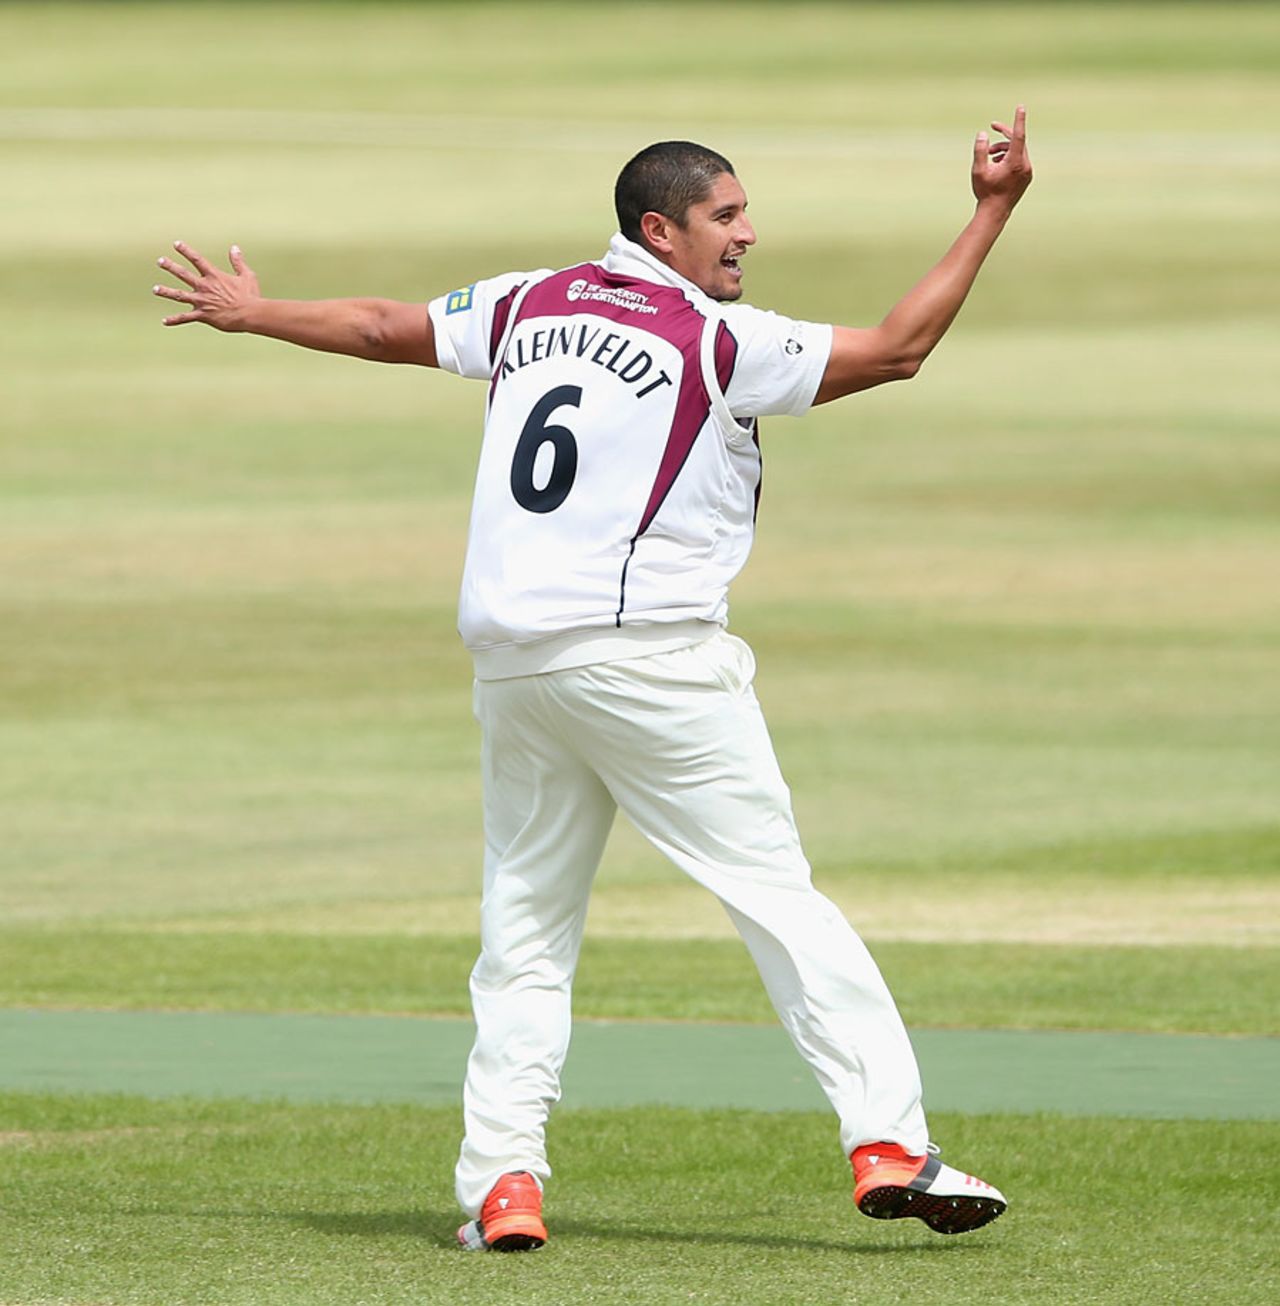 Rory Kleinveldt appeals, Northamptonshire v Essex, County Championship, Division Two, Wantage Road, June 9, 2015